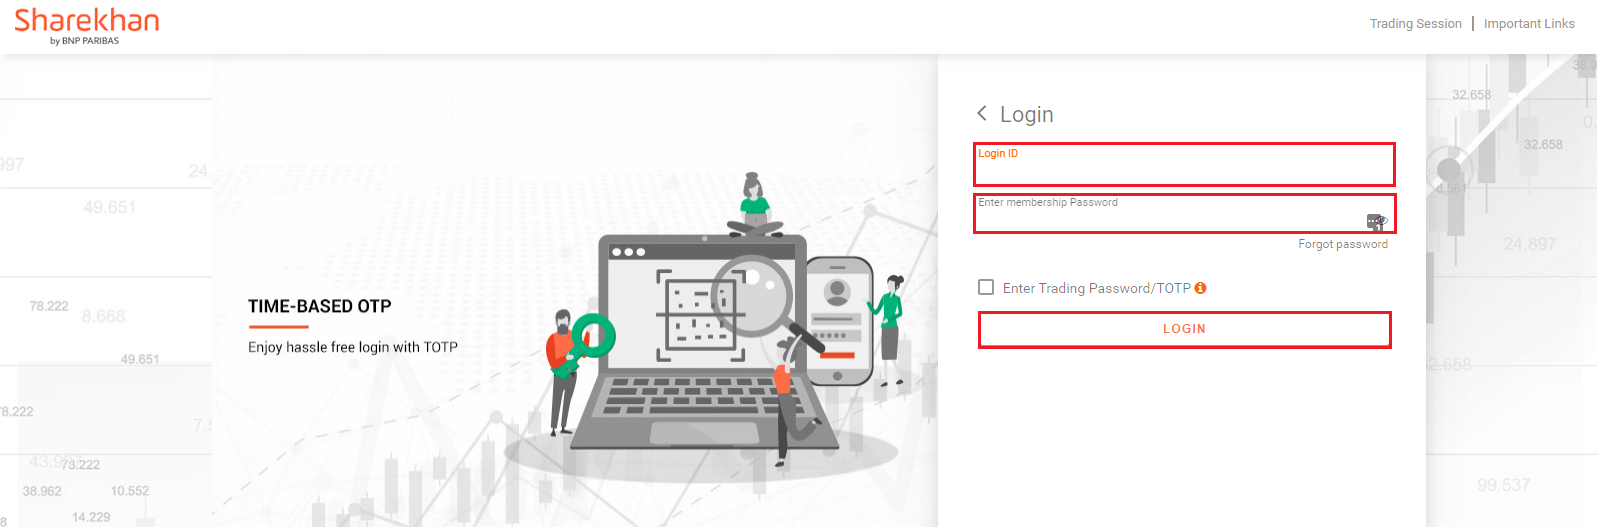 Sharekhan Create an account and Log in, Download ledger, Tax P&L